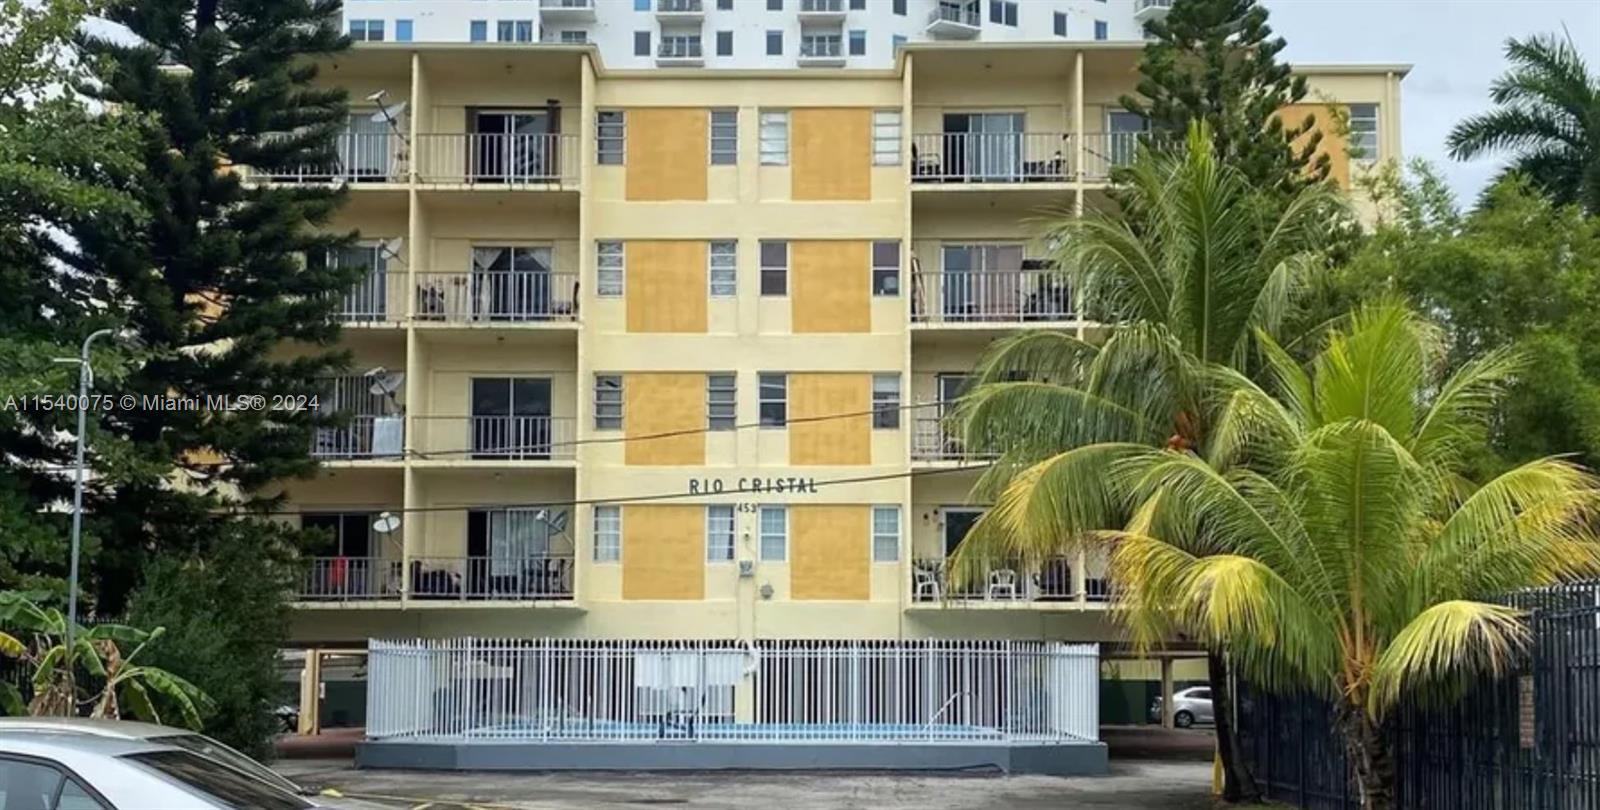 This 3rd floor, corner unit has 707 Sq. Ft., 2 beds, 1 bath and is located in Riverside near Little Havana.  Great opportunity to own in an excellent location and remodel to make it your own;  The building has a gated entry and laundry room on each floor. Just a few steps from 8th Street, close to Brickell/Downtown, airports and the beaches.  Being sold as is.